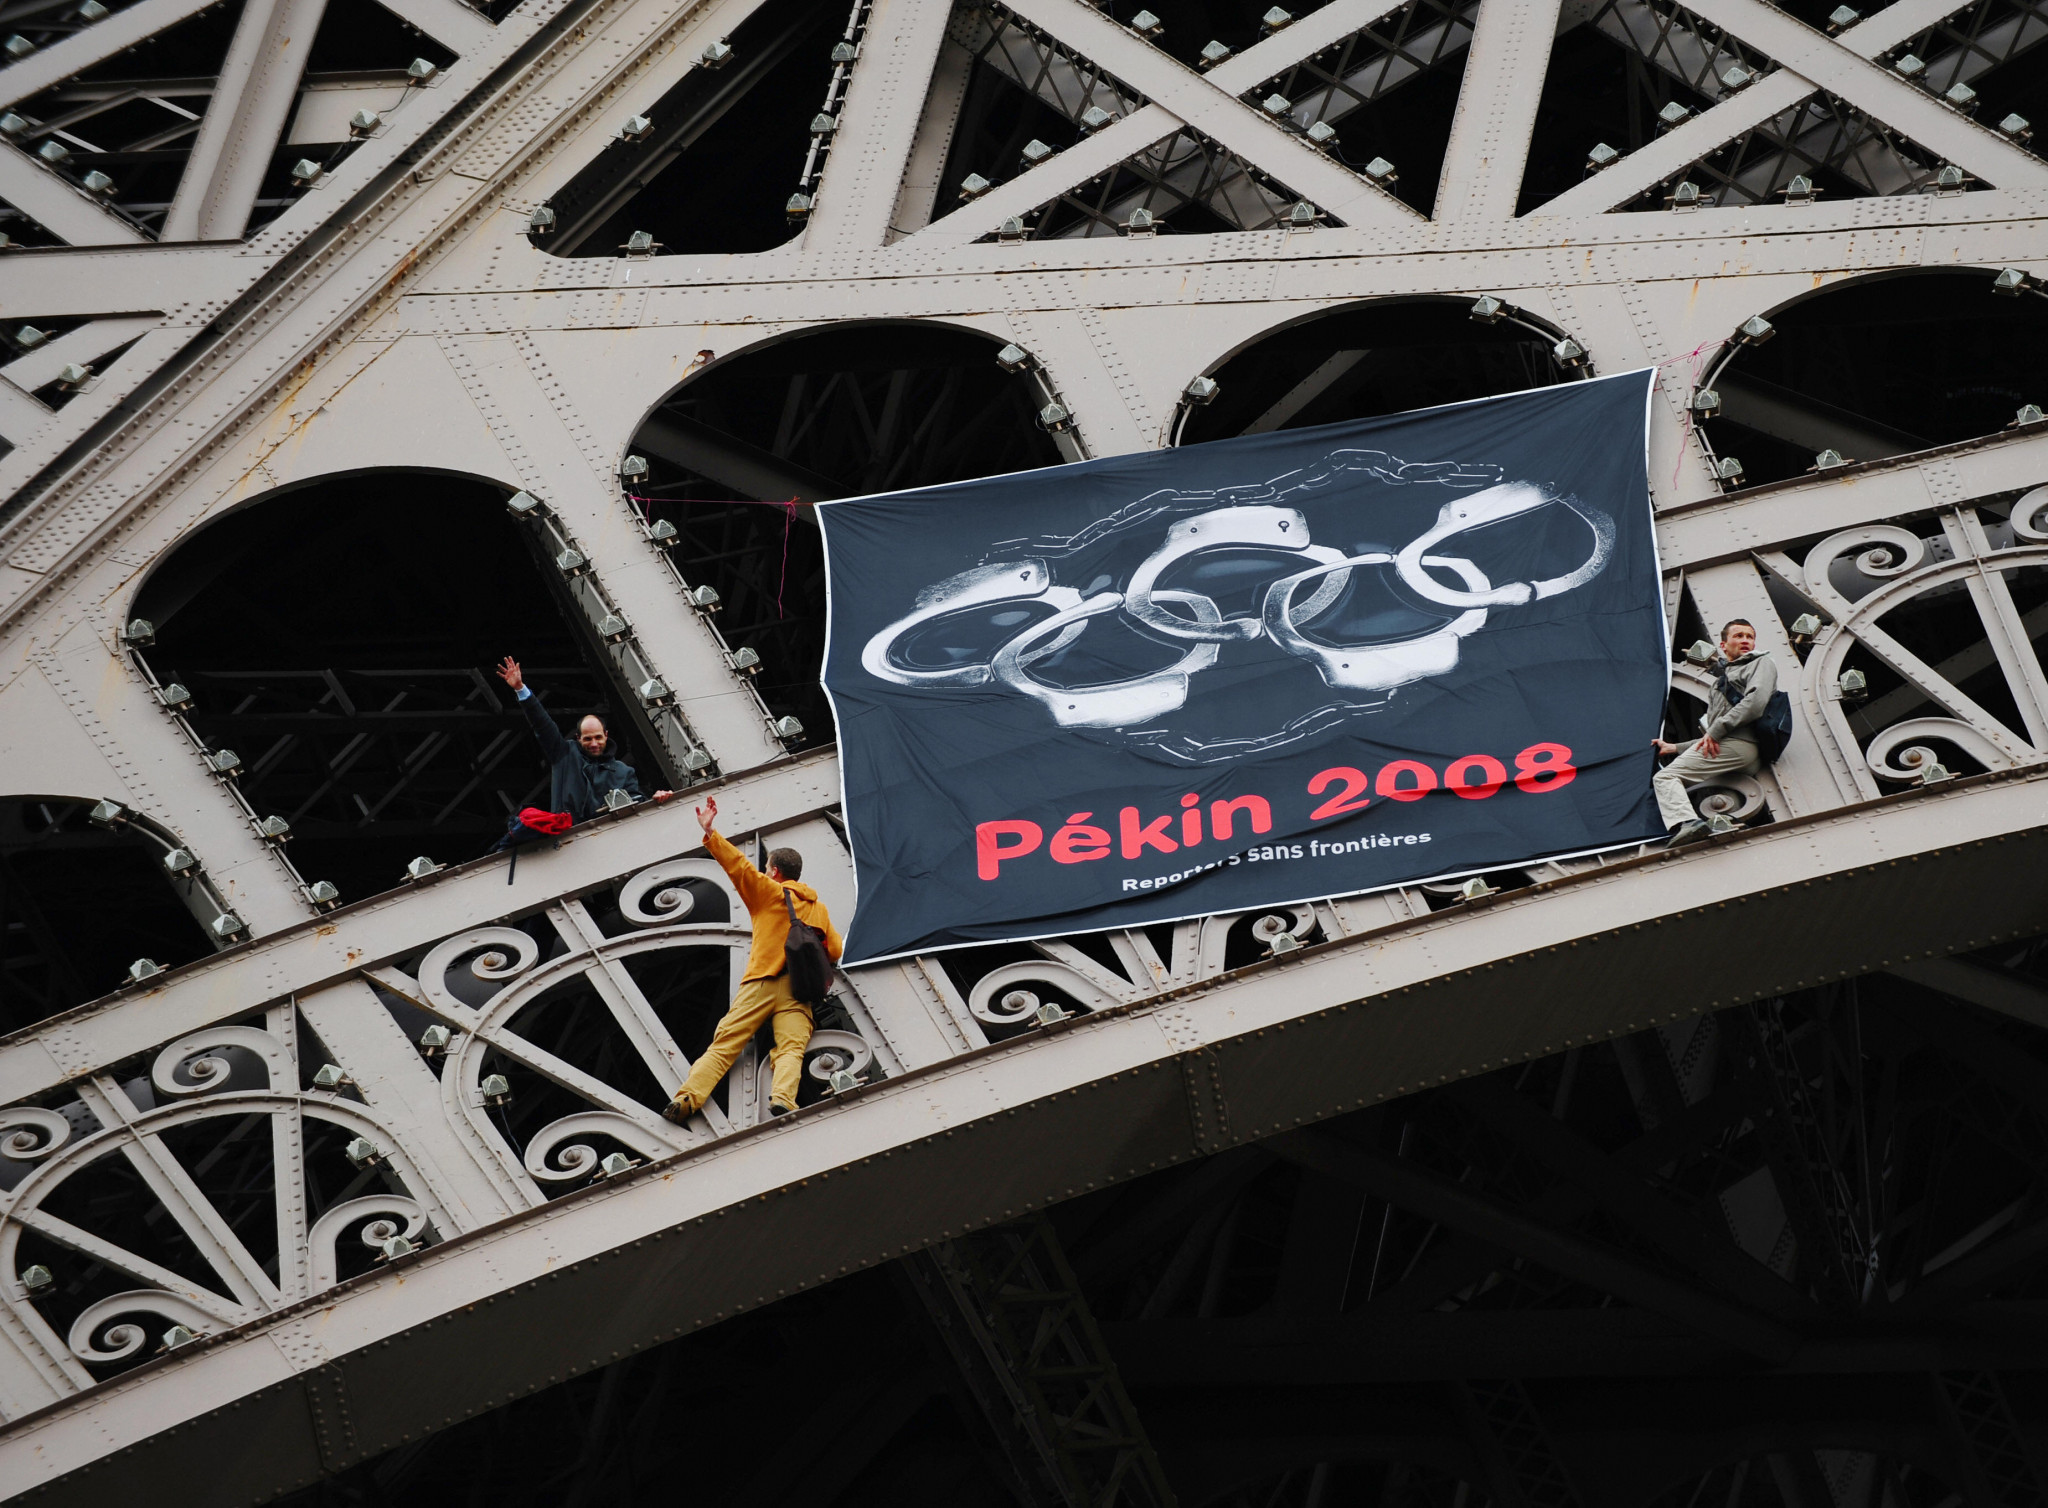 Protesters against China's human rights forced the abandonment of the last Torch Relay to visit Paris in 2008 ©Getty Images